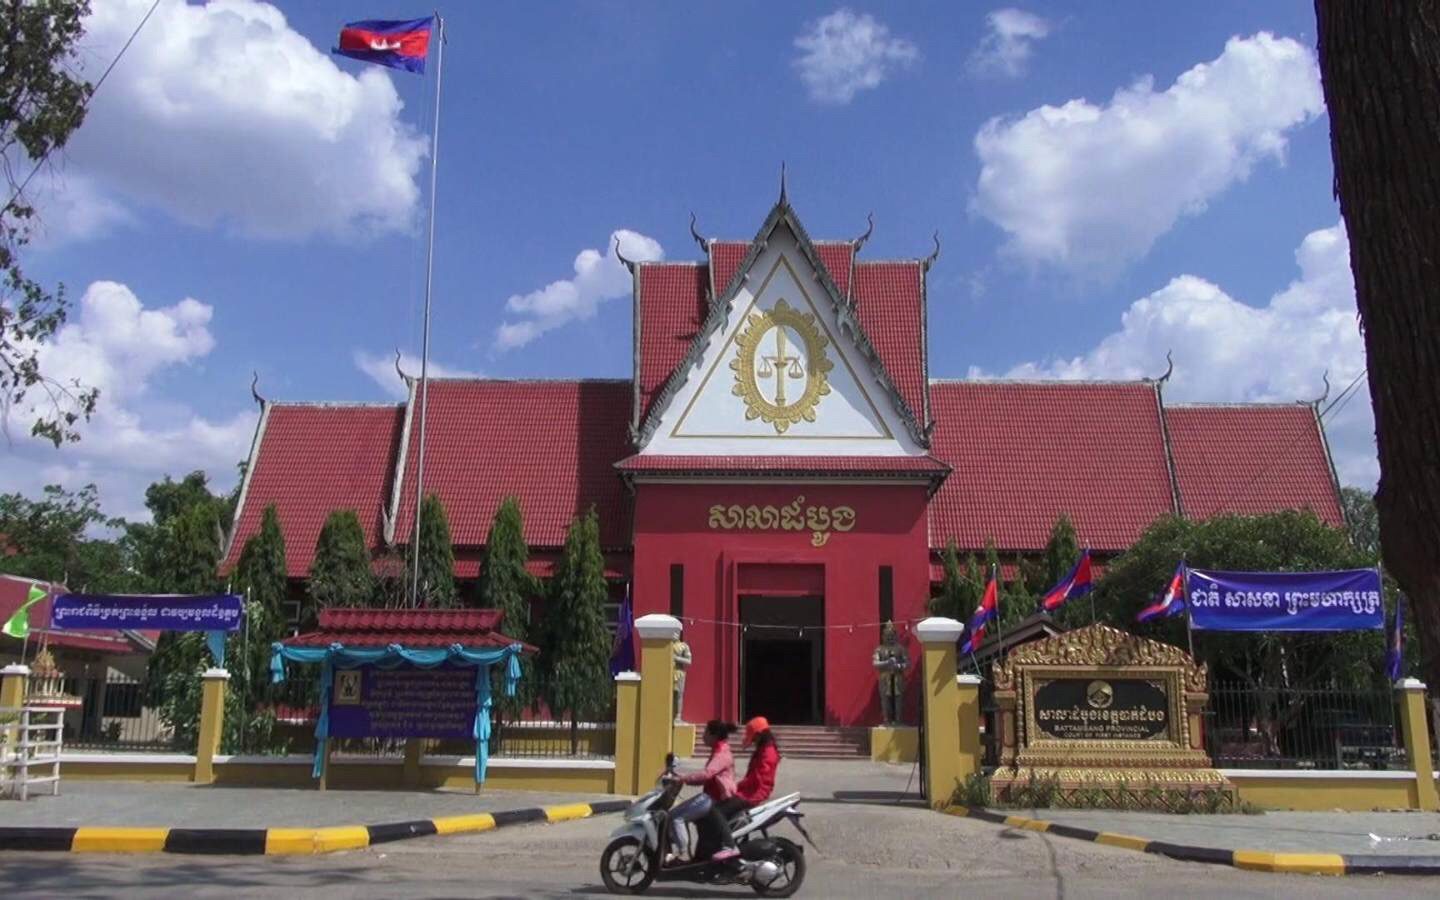 Battambang provincial court building in 2017. (Huy Ousa/VOD)